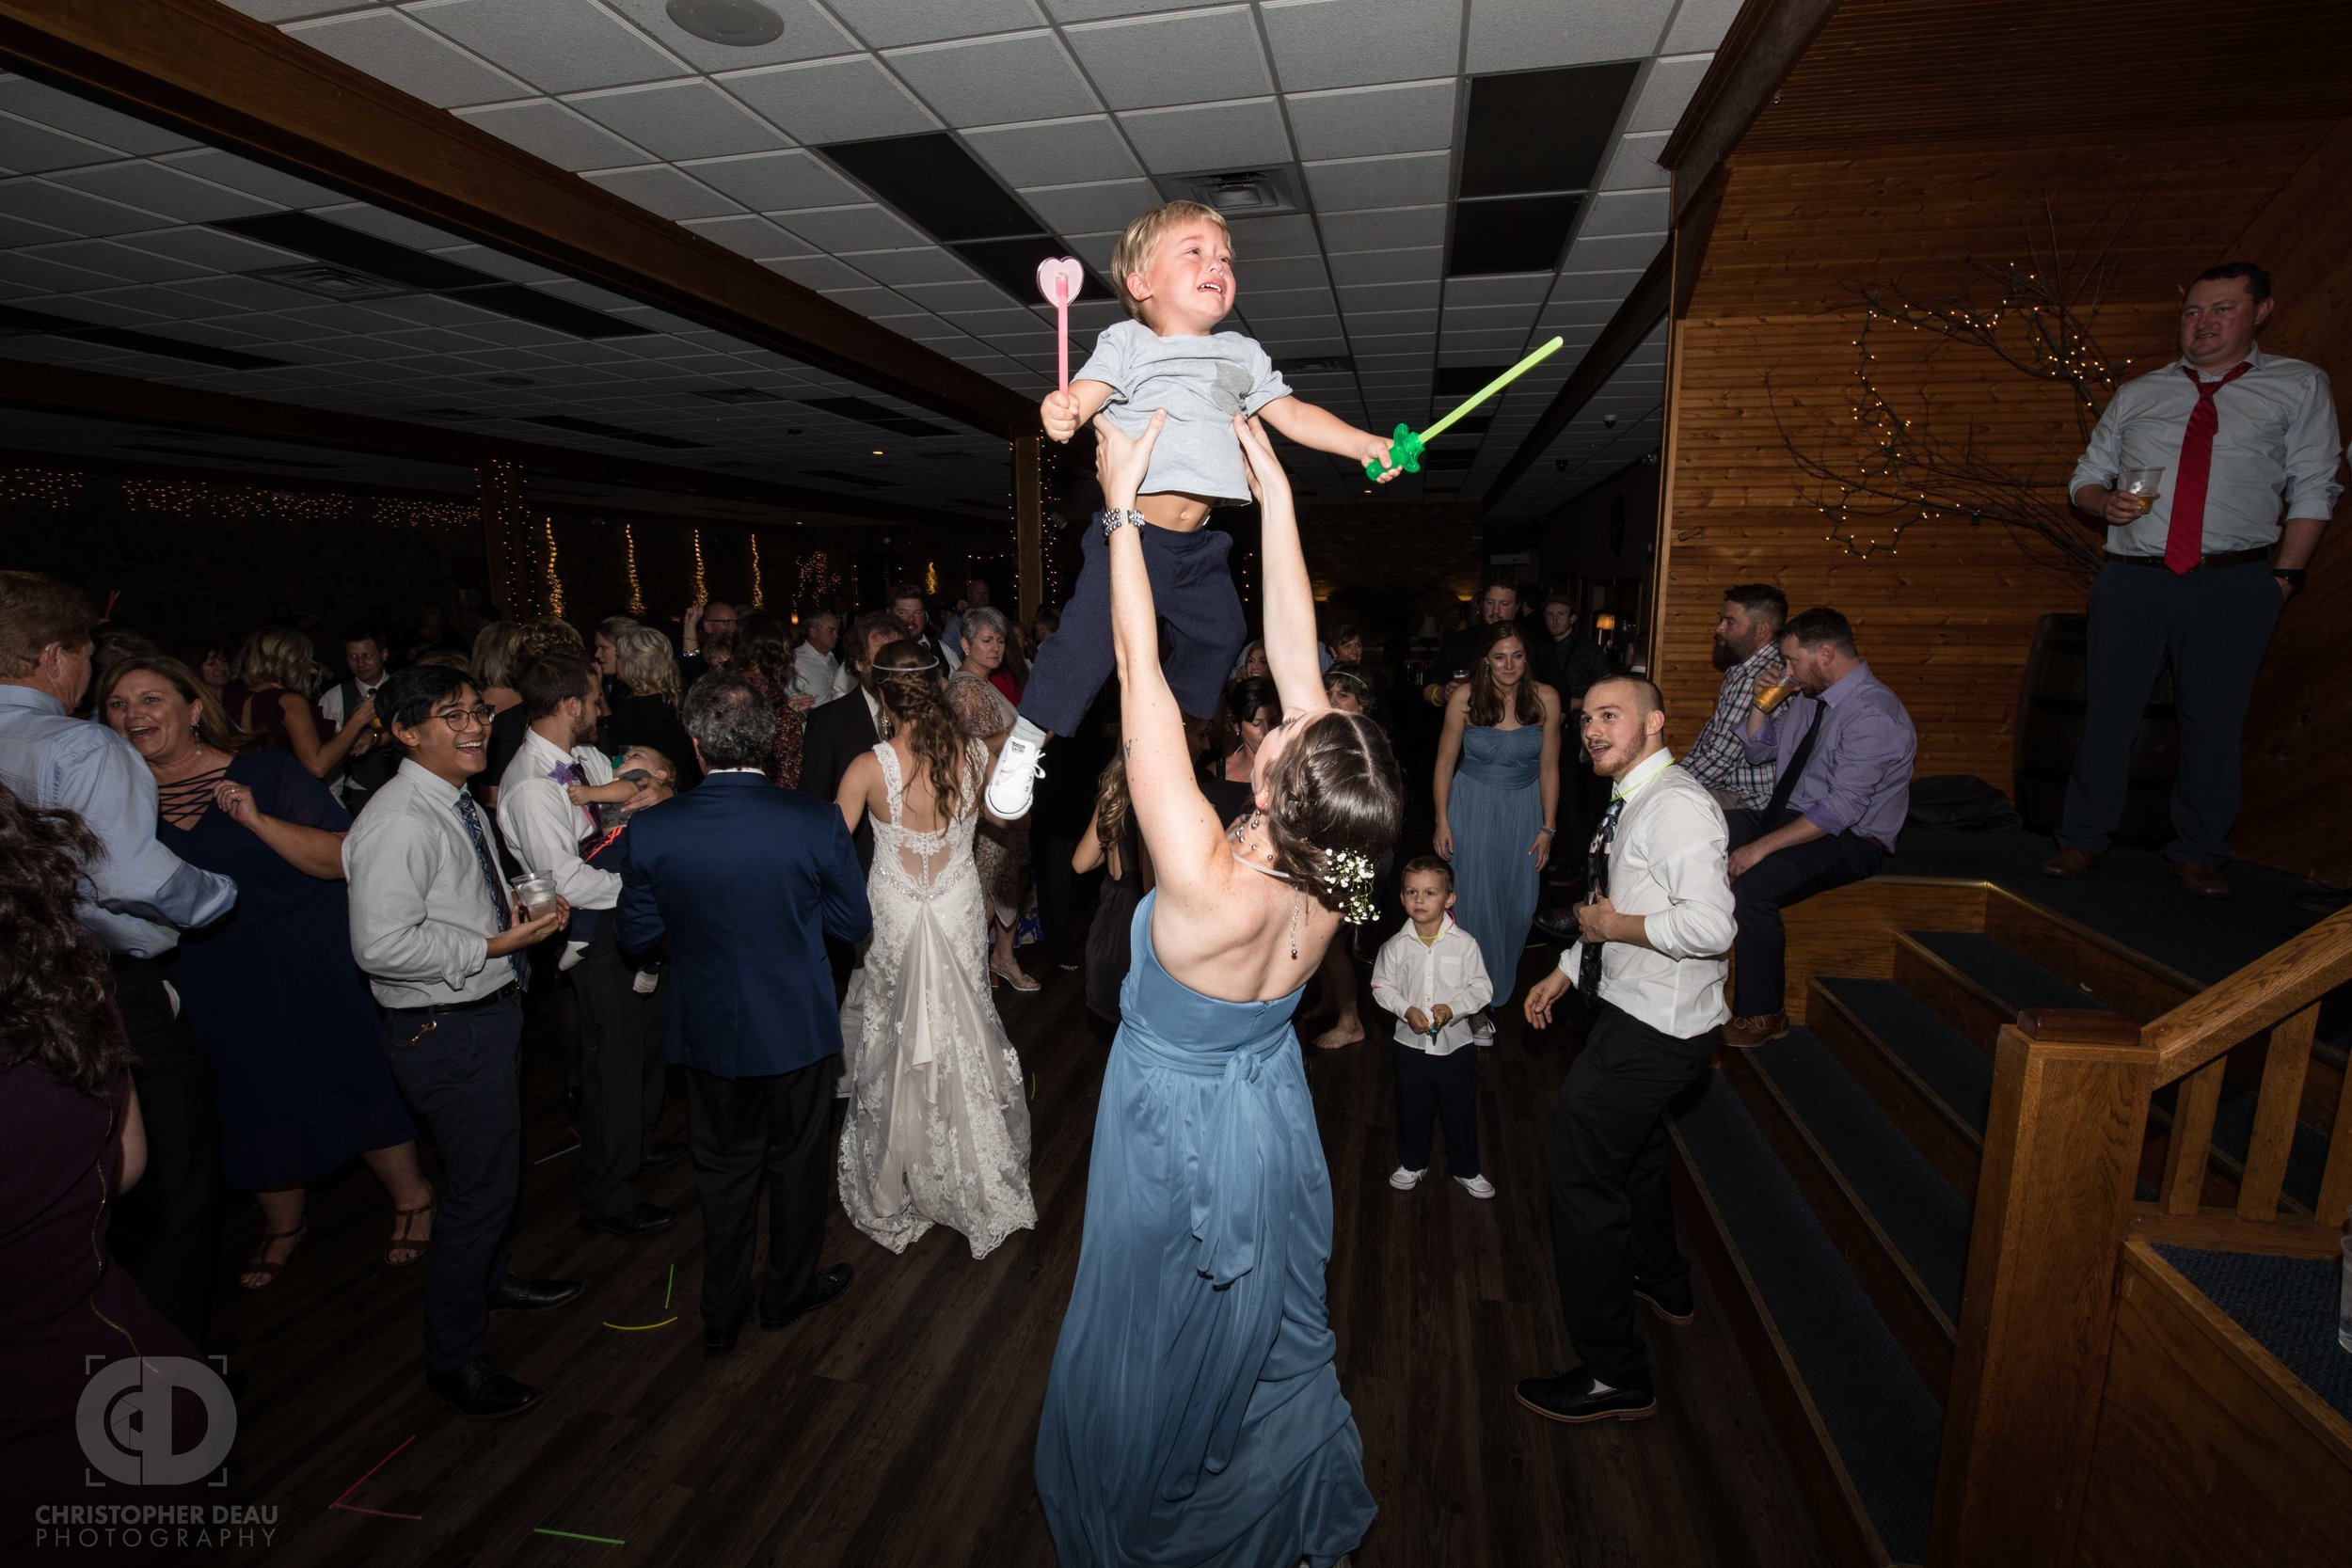  Bridesmaid throwing crying toddler into the air on the dance floor 